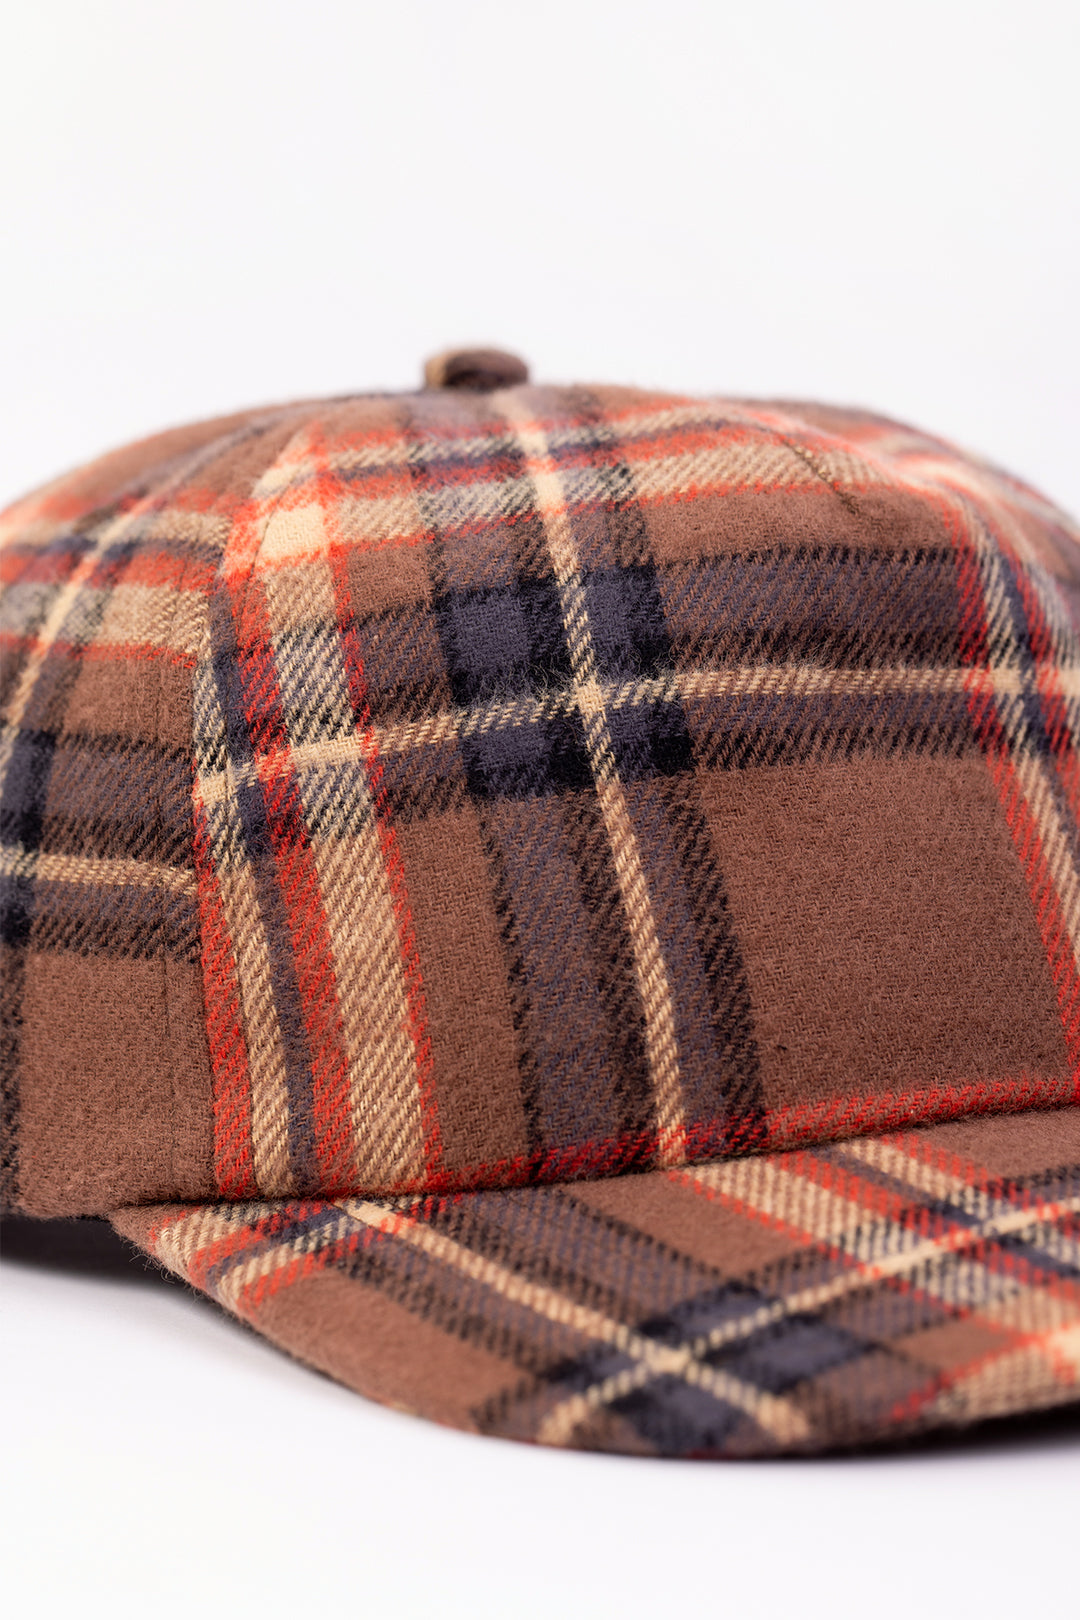 Flannel Floppy Cap Checked made from 100% organic cotton from Rotholz